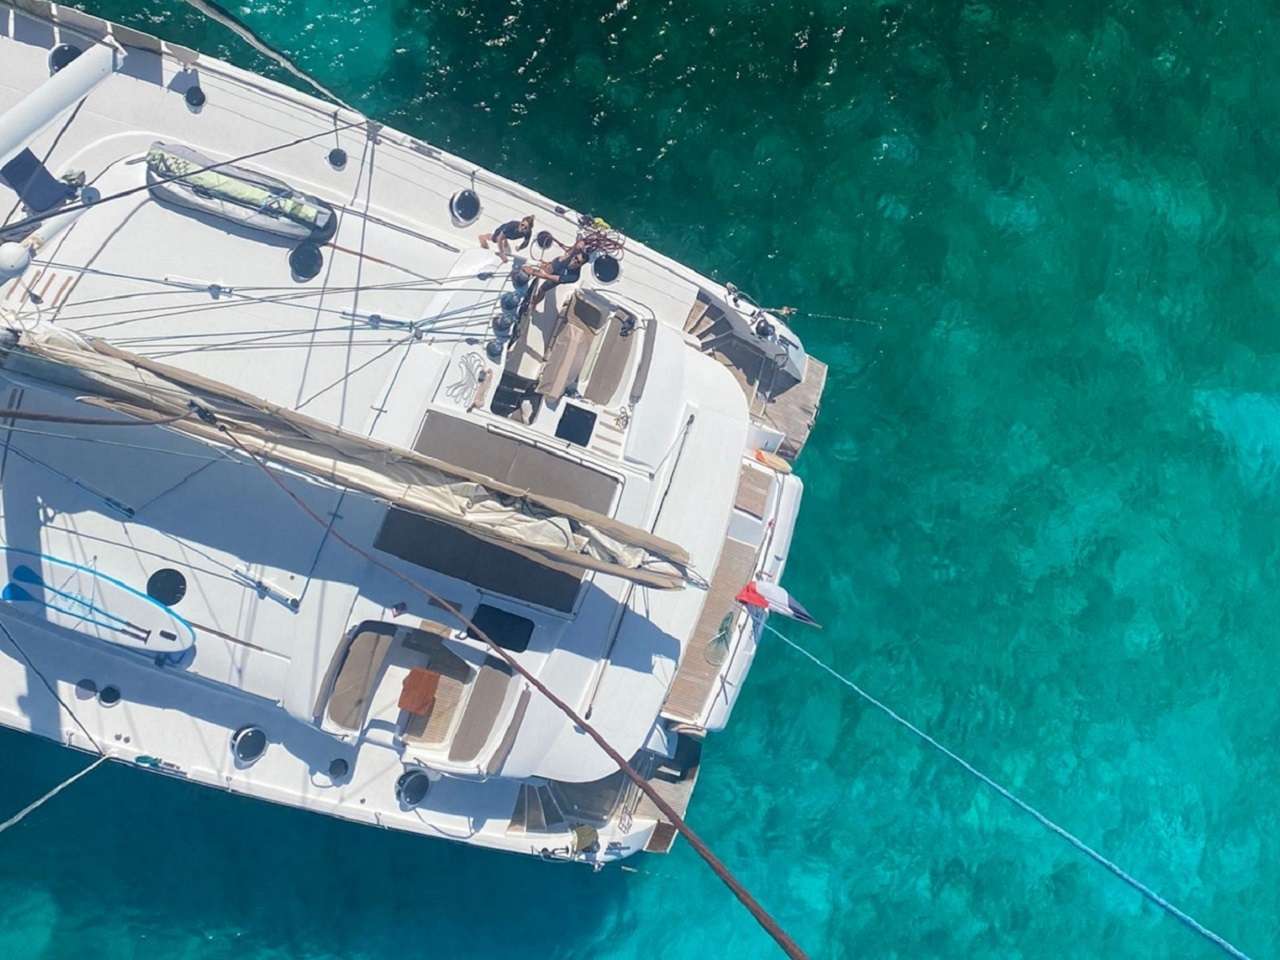 Catamaran Yacht 'MOBY DICK' On deck, 10 PAX, 3 Crew, 65.00 Ft, 19.00 Meters, Built 2009, Fountaine Pajot, Refit Year 2021